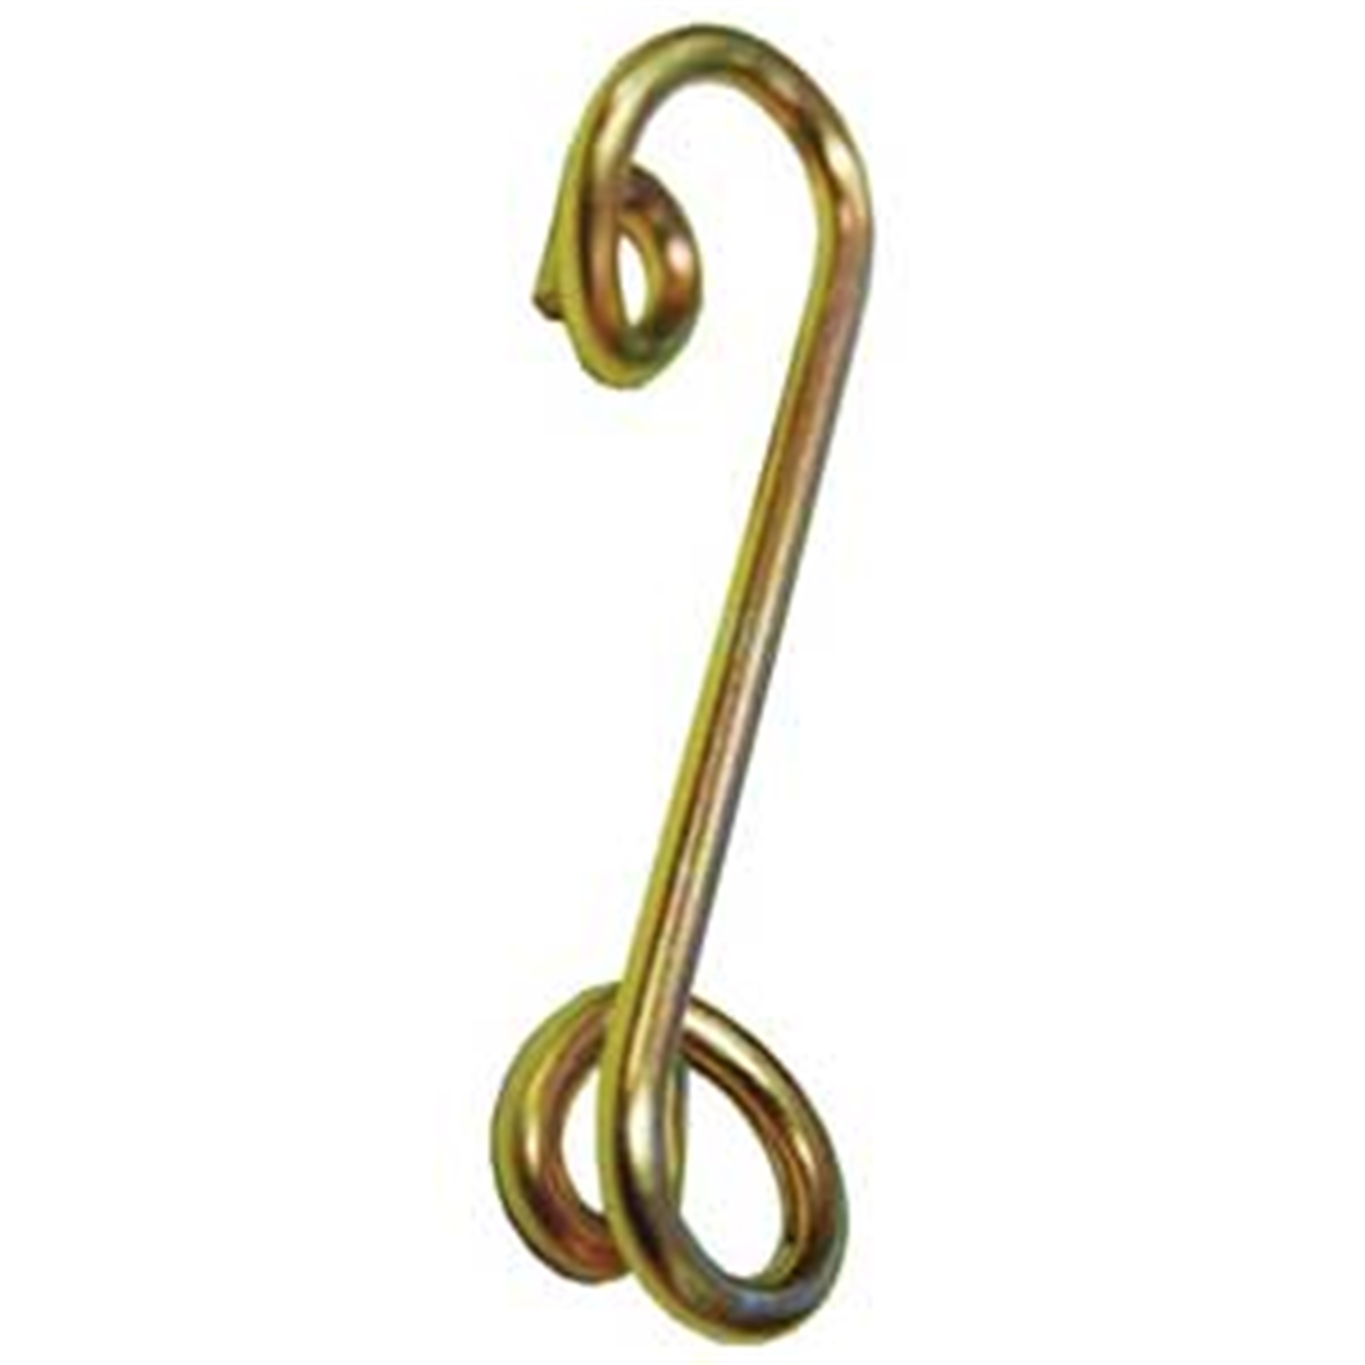 Gold Color 1.00" Panelfast Spring .375" Height